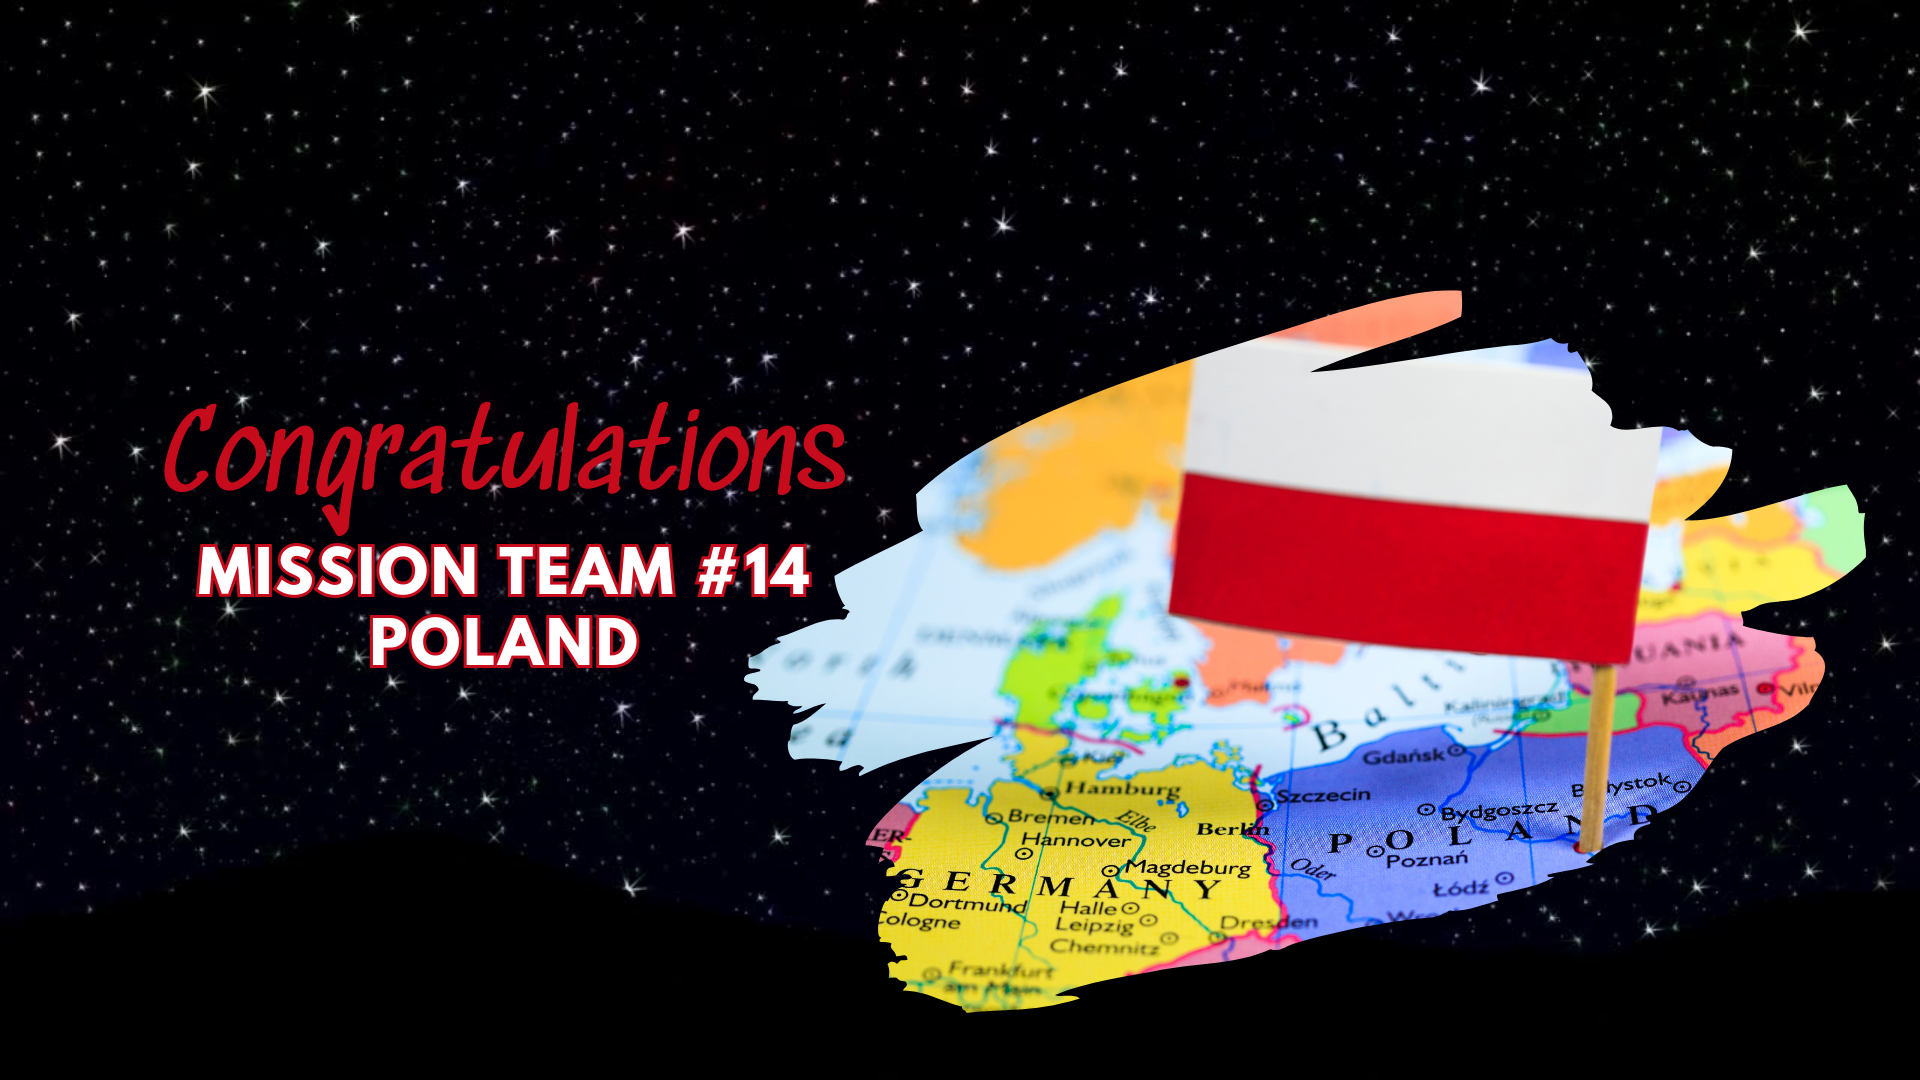 Endeavour Scholarship Launches First Polish Team To U.S. Space Camp -  Armada International